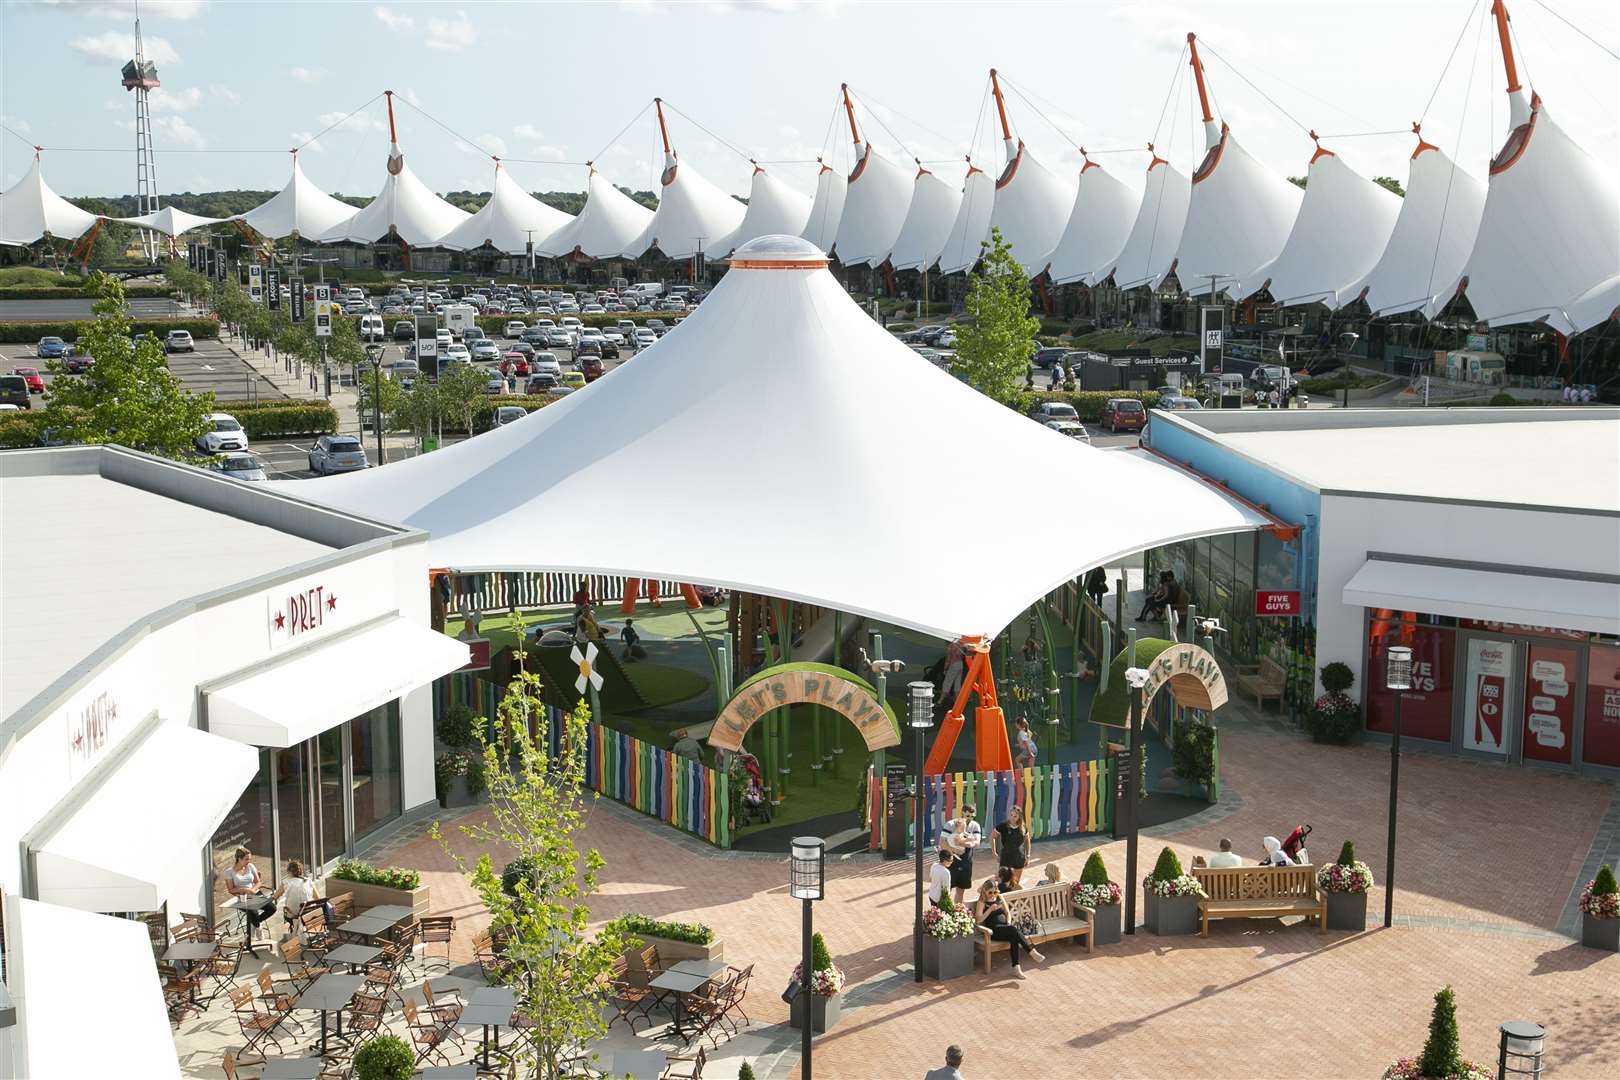 The thief also took handbags from Michael Kors at the Ashford Designer Outlet